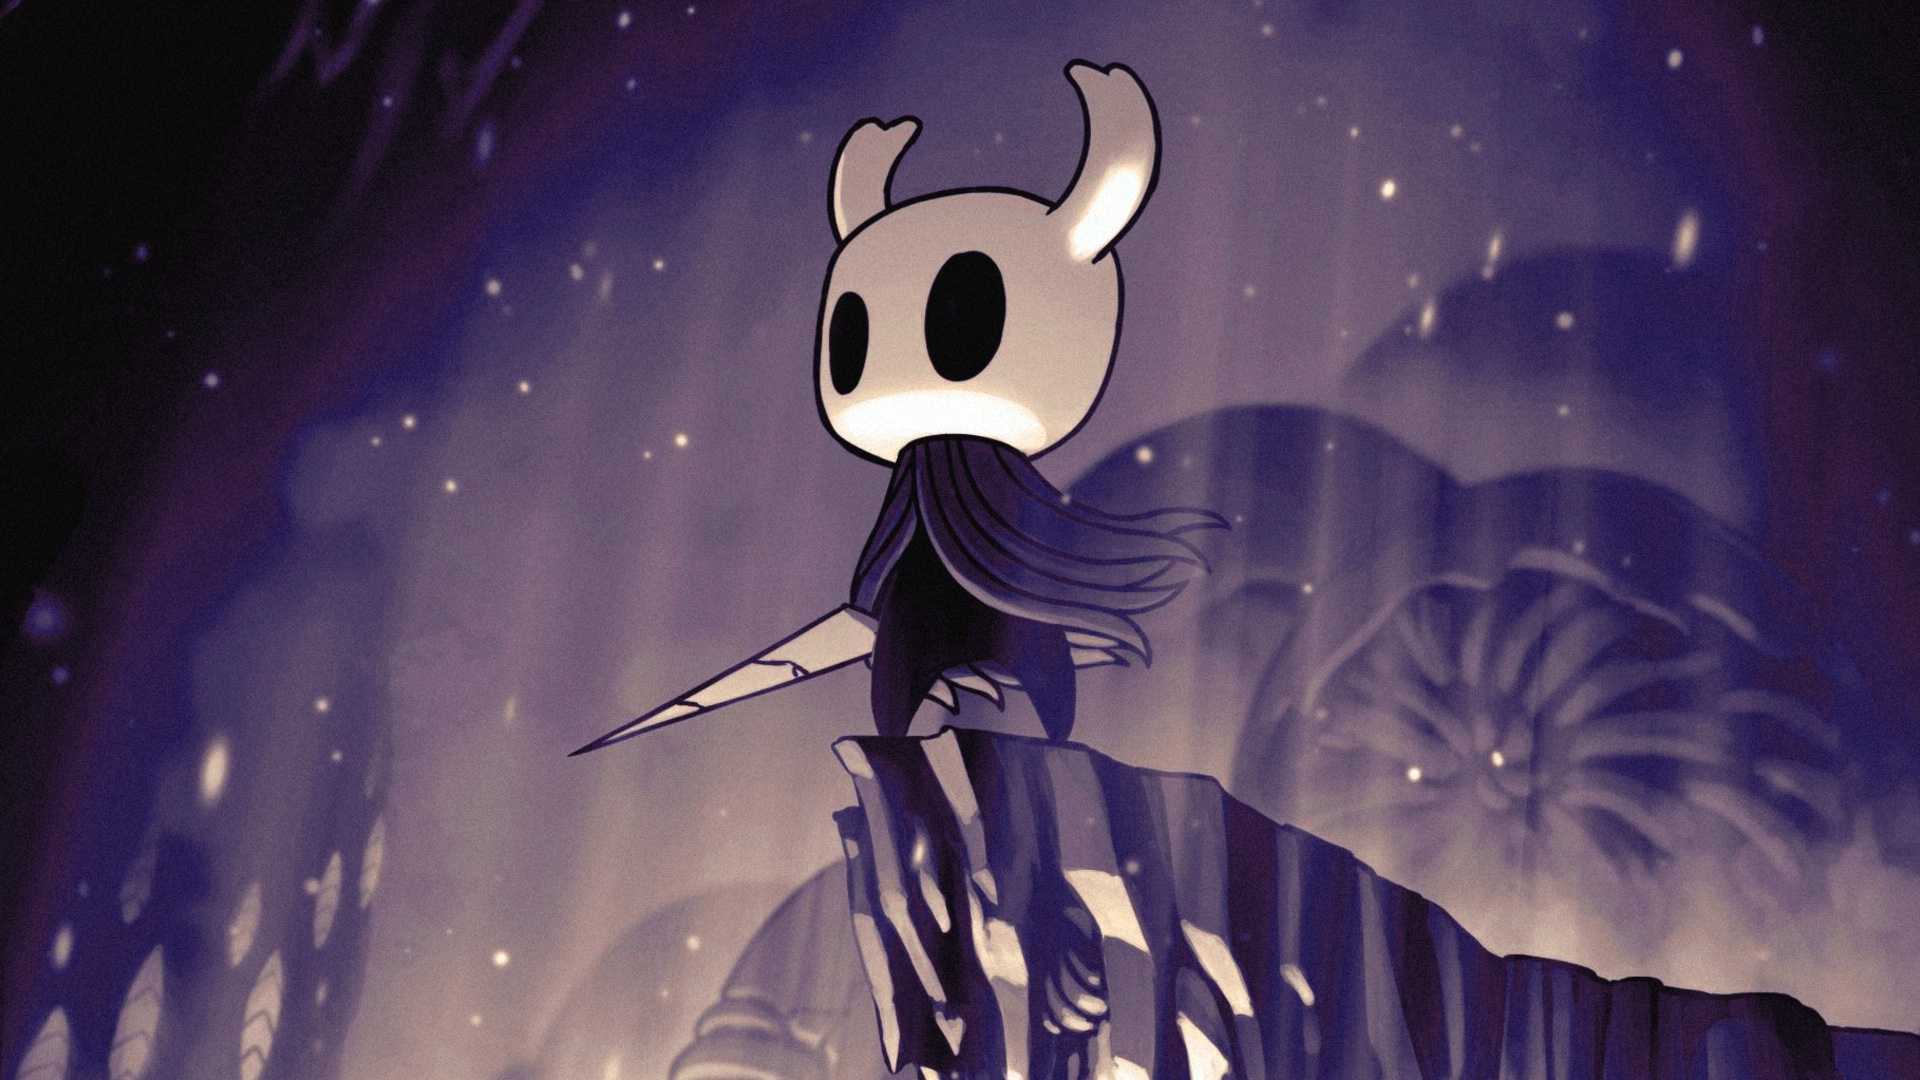 Hollow knight wallpaper whatspaper 4